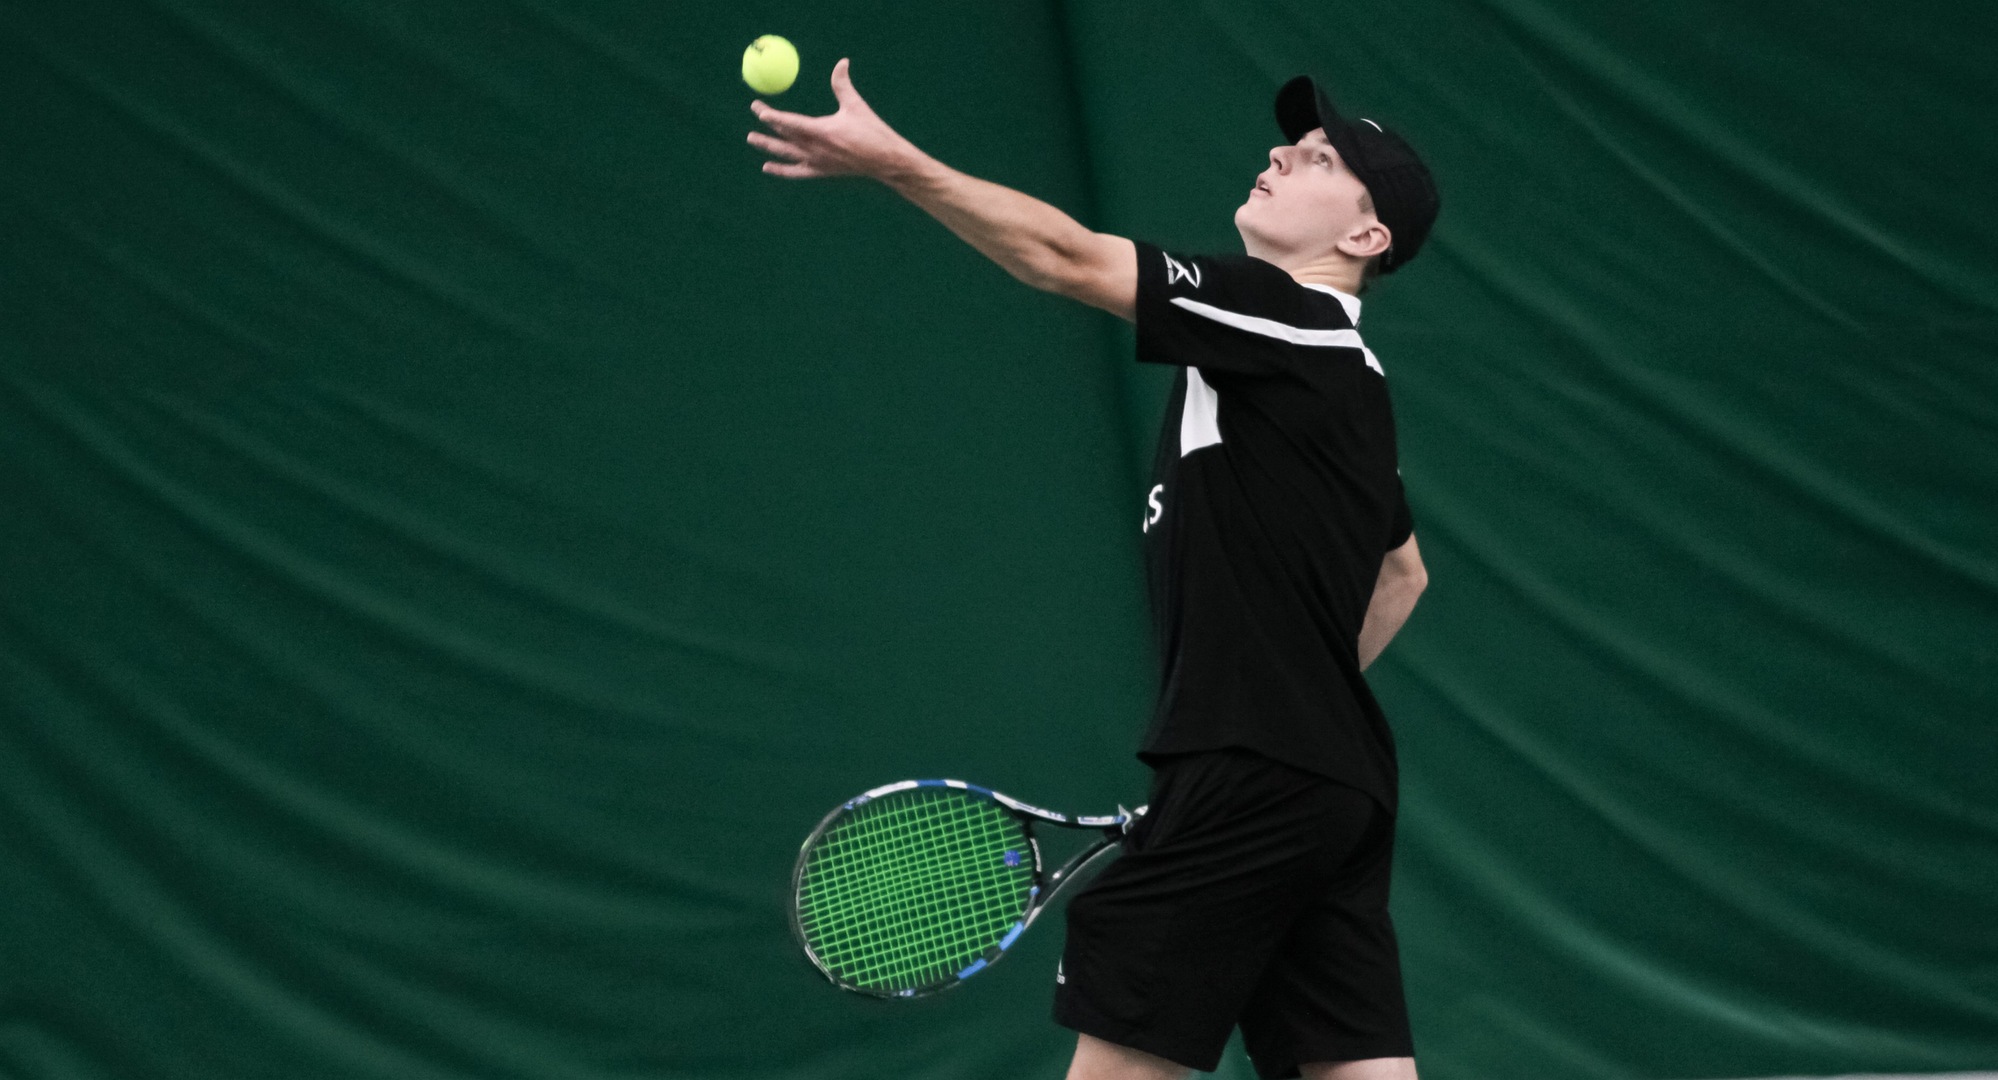 Men’s Tennis Advances To #HLMTEN Championship Match With 4-0 Victory Over YSU